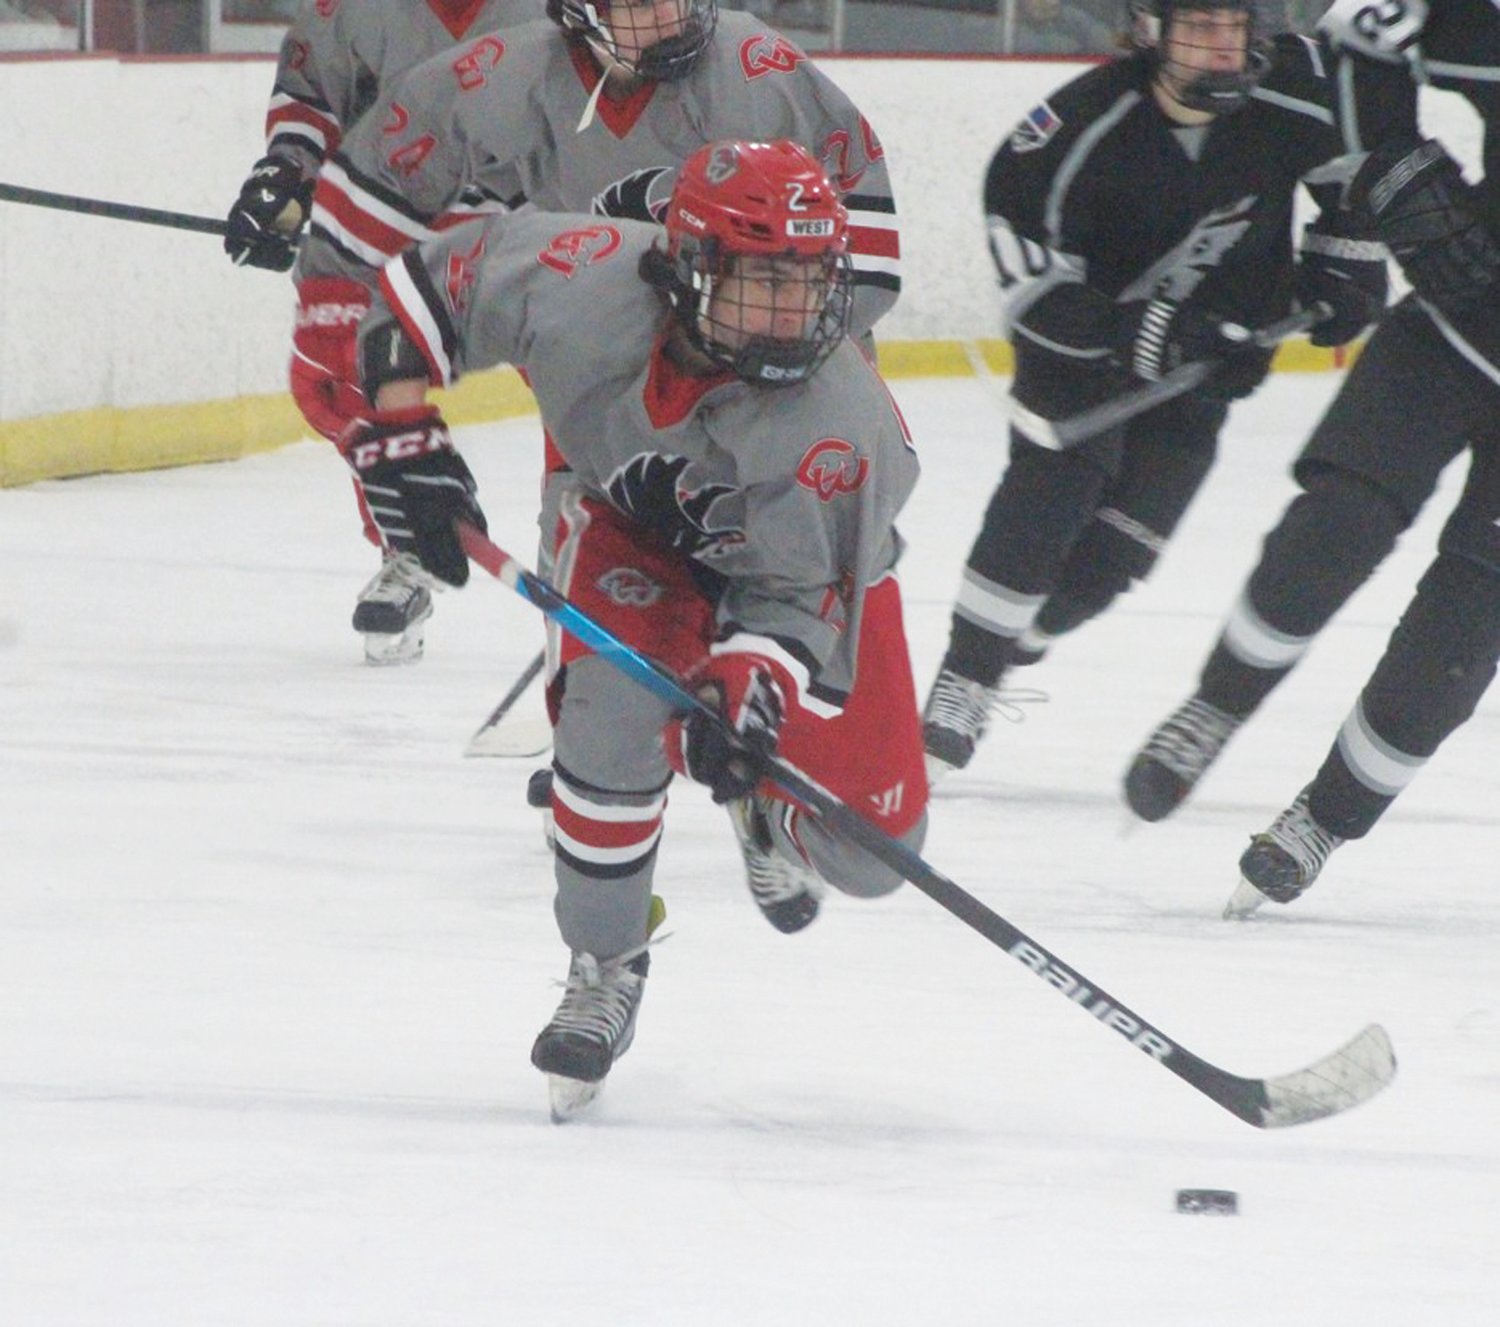 UP THE ICE: Jared Prior takes the puck up the ice last weekend. (Photos by Alex Sponseller)